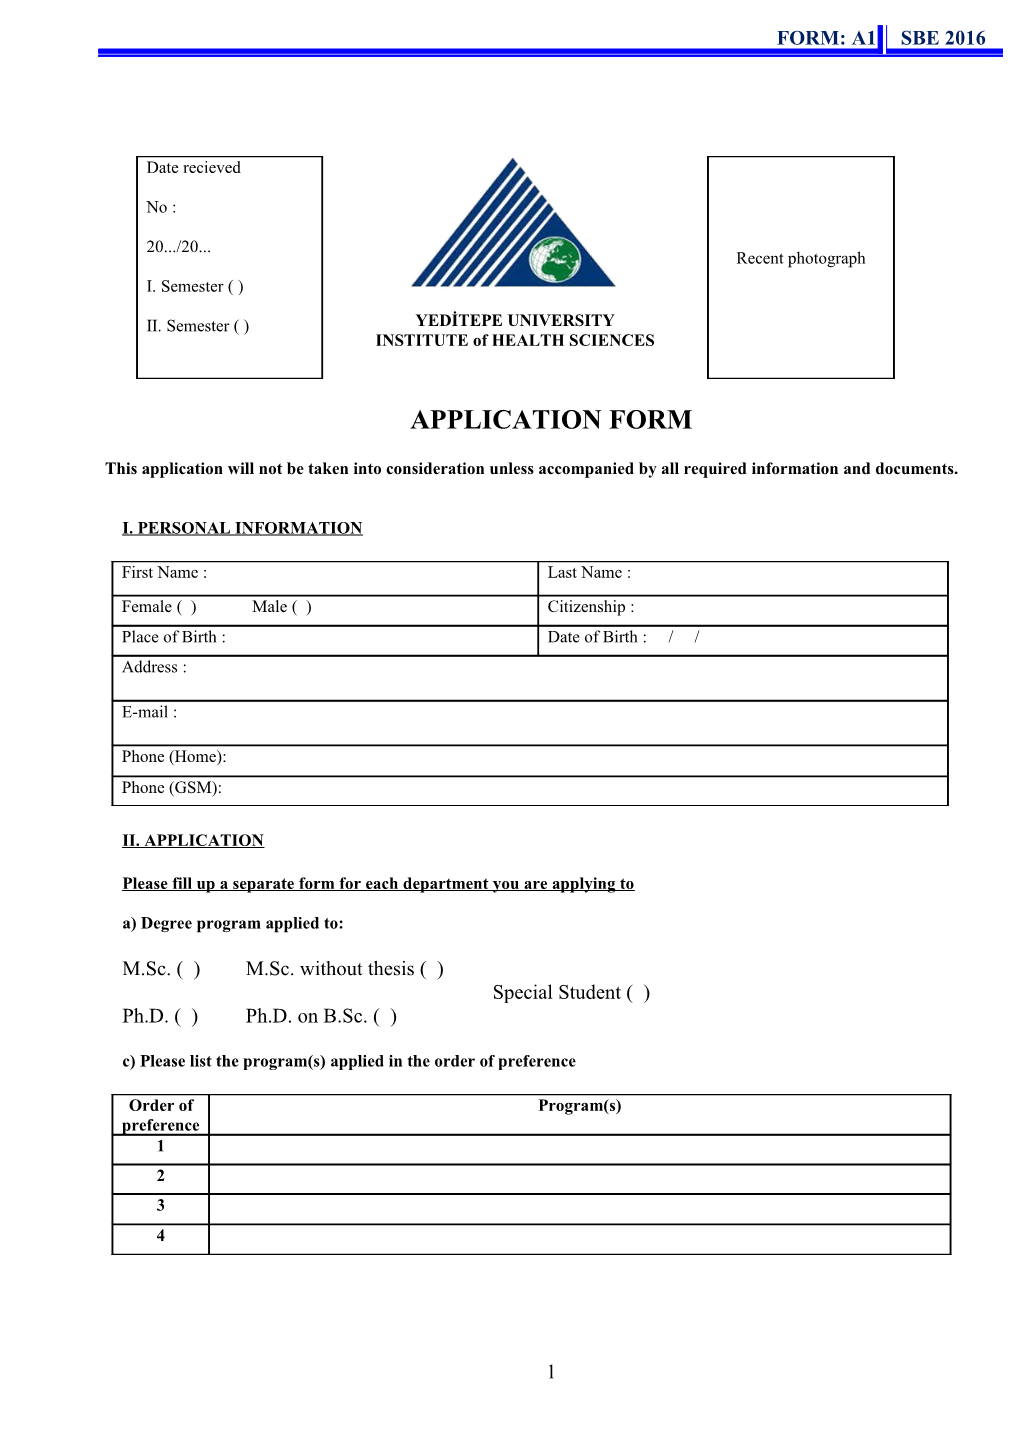 Application Form s82